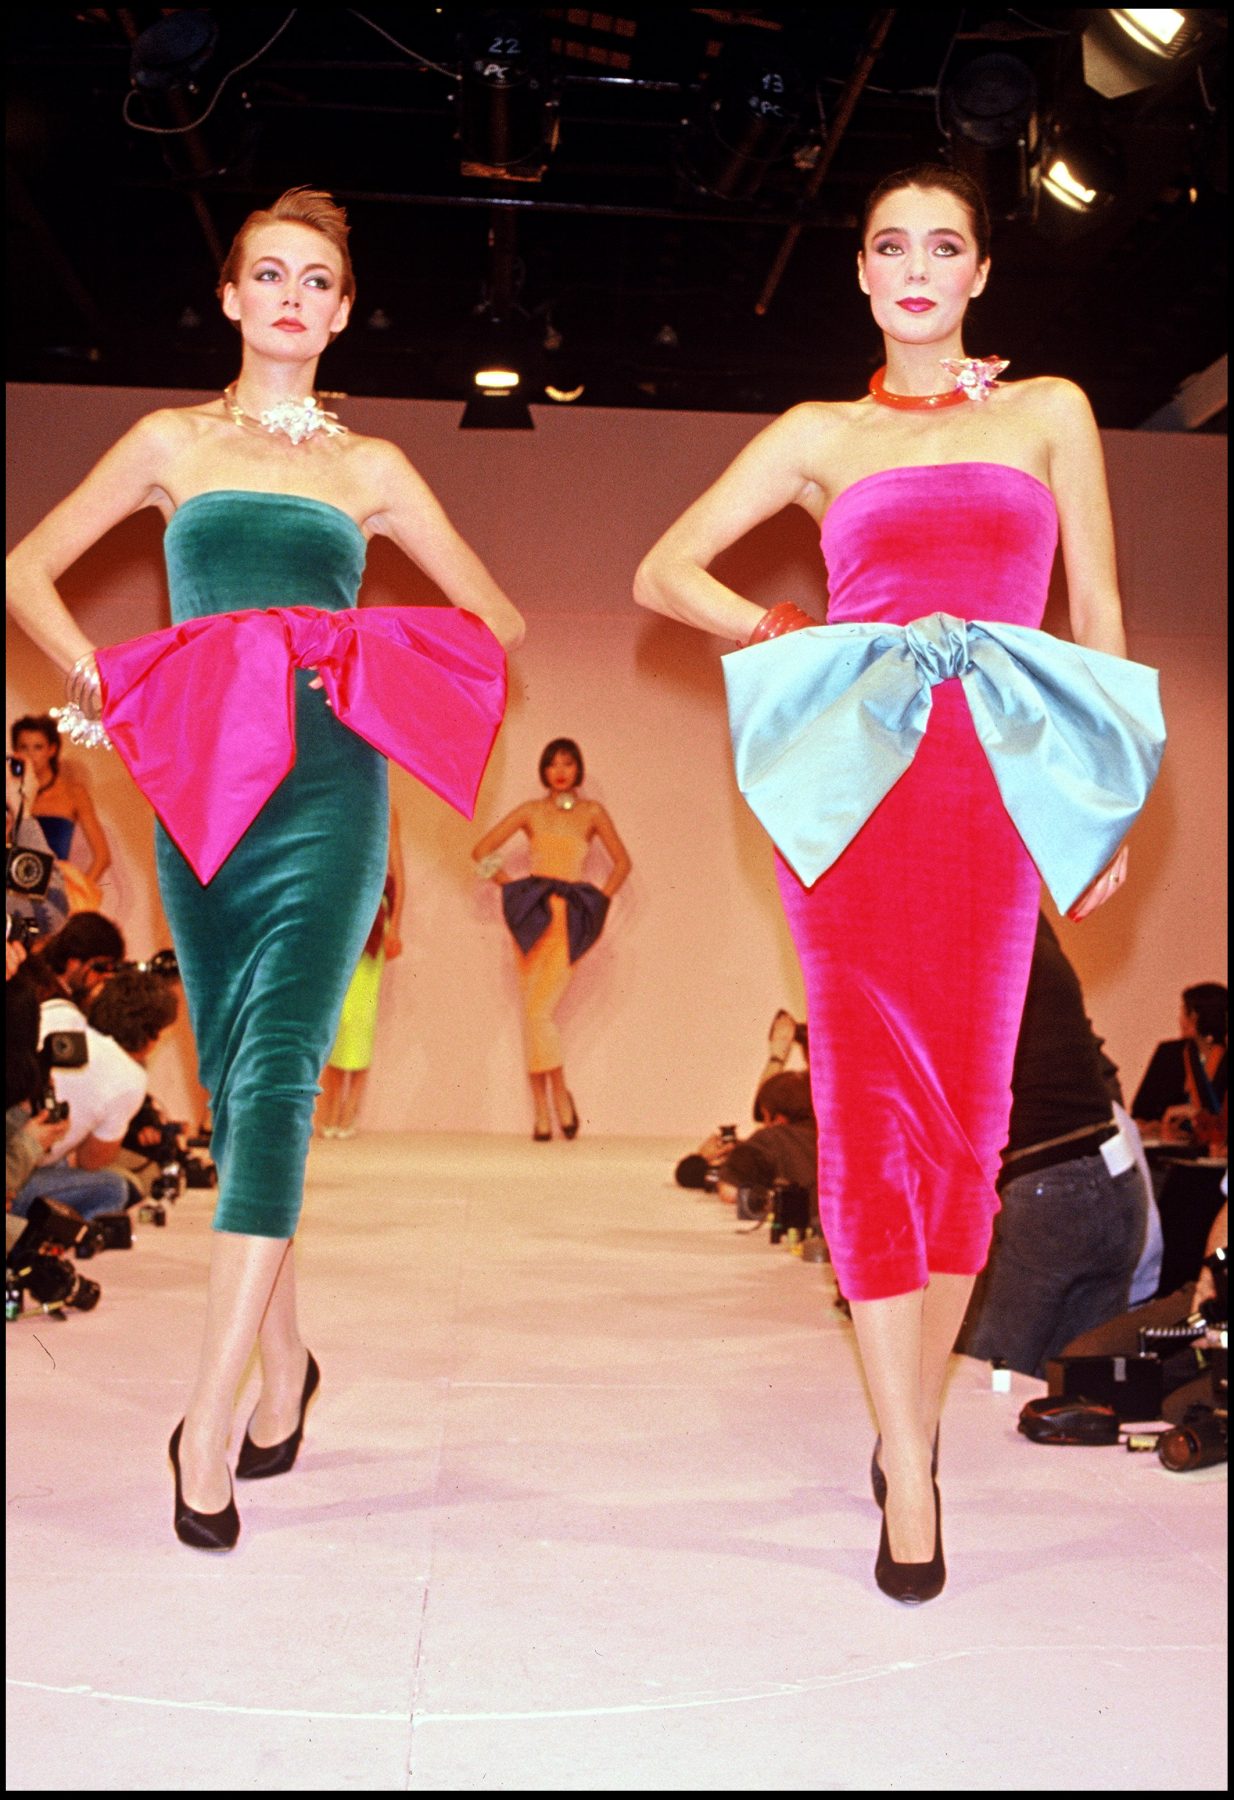 Revisit The Late Pierre Cardin’s Remarkable Life In Pictures